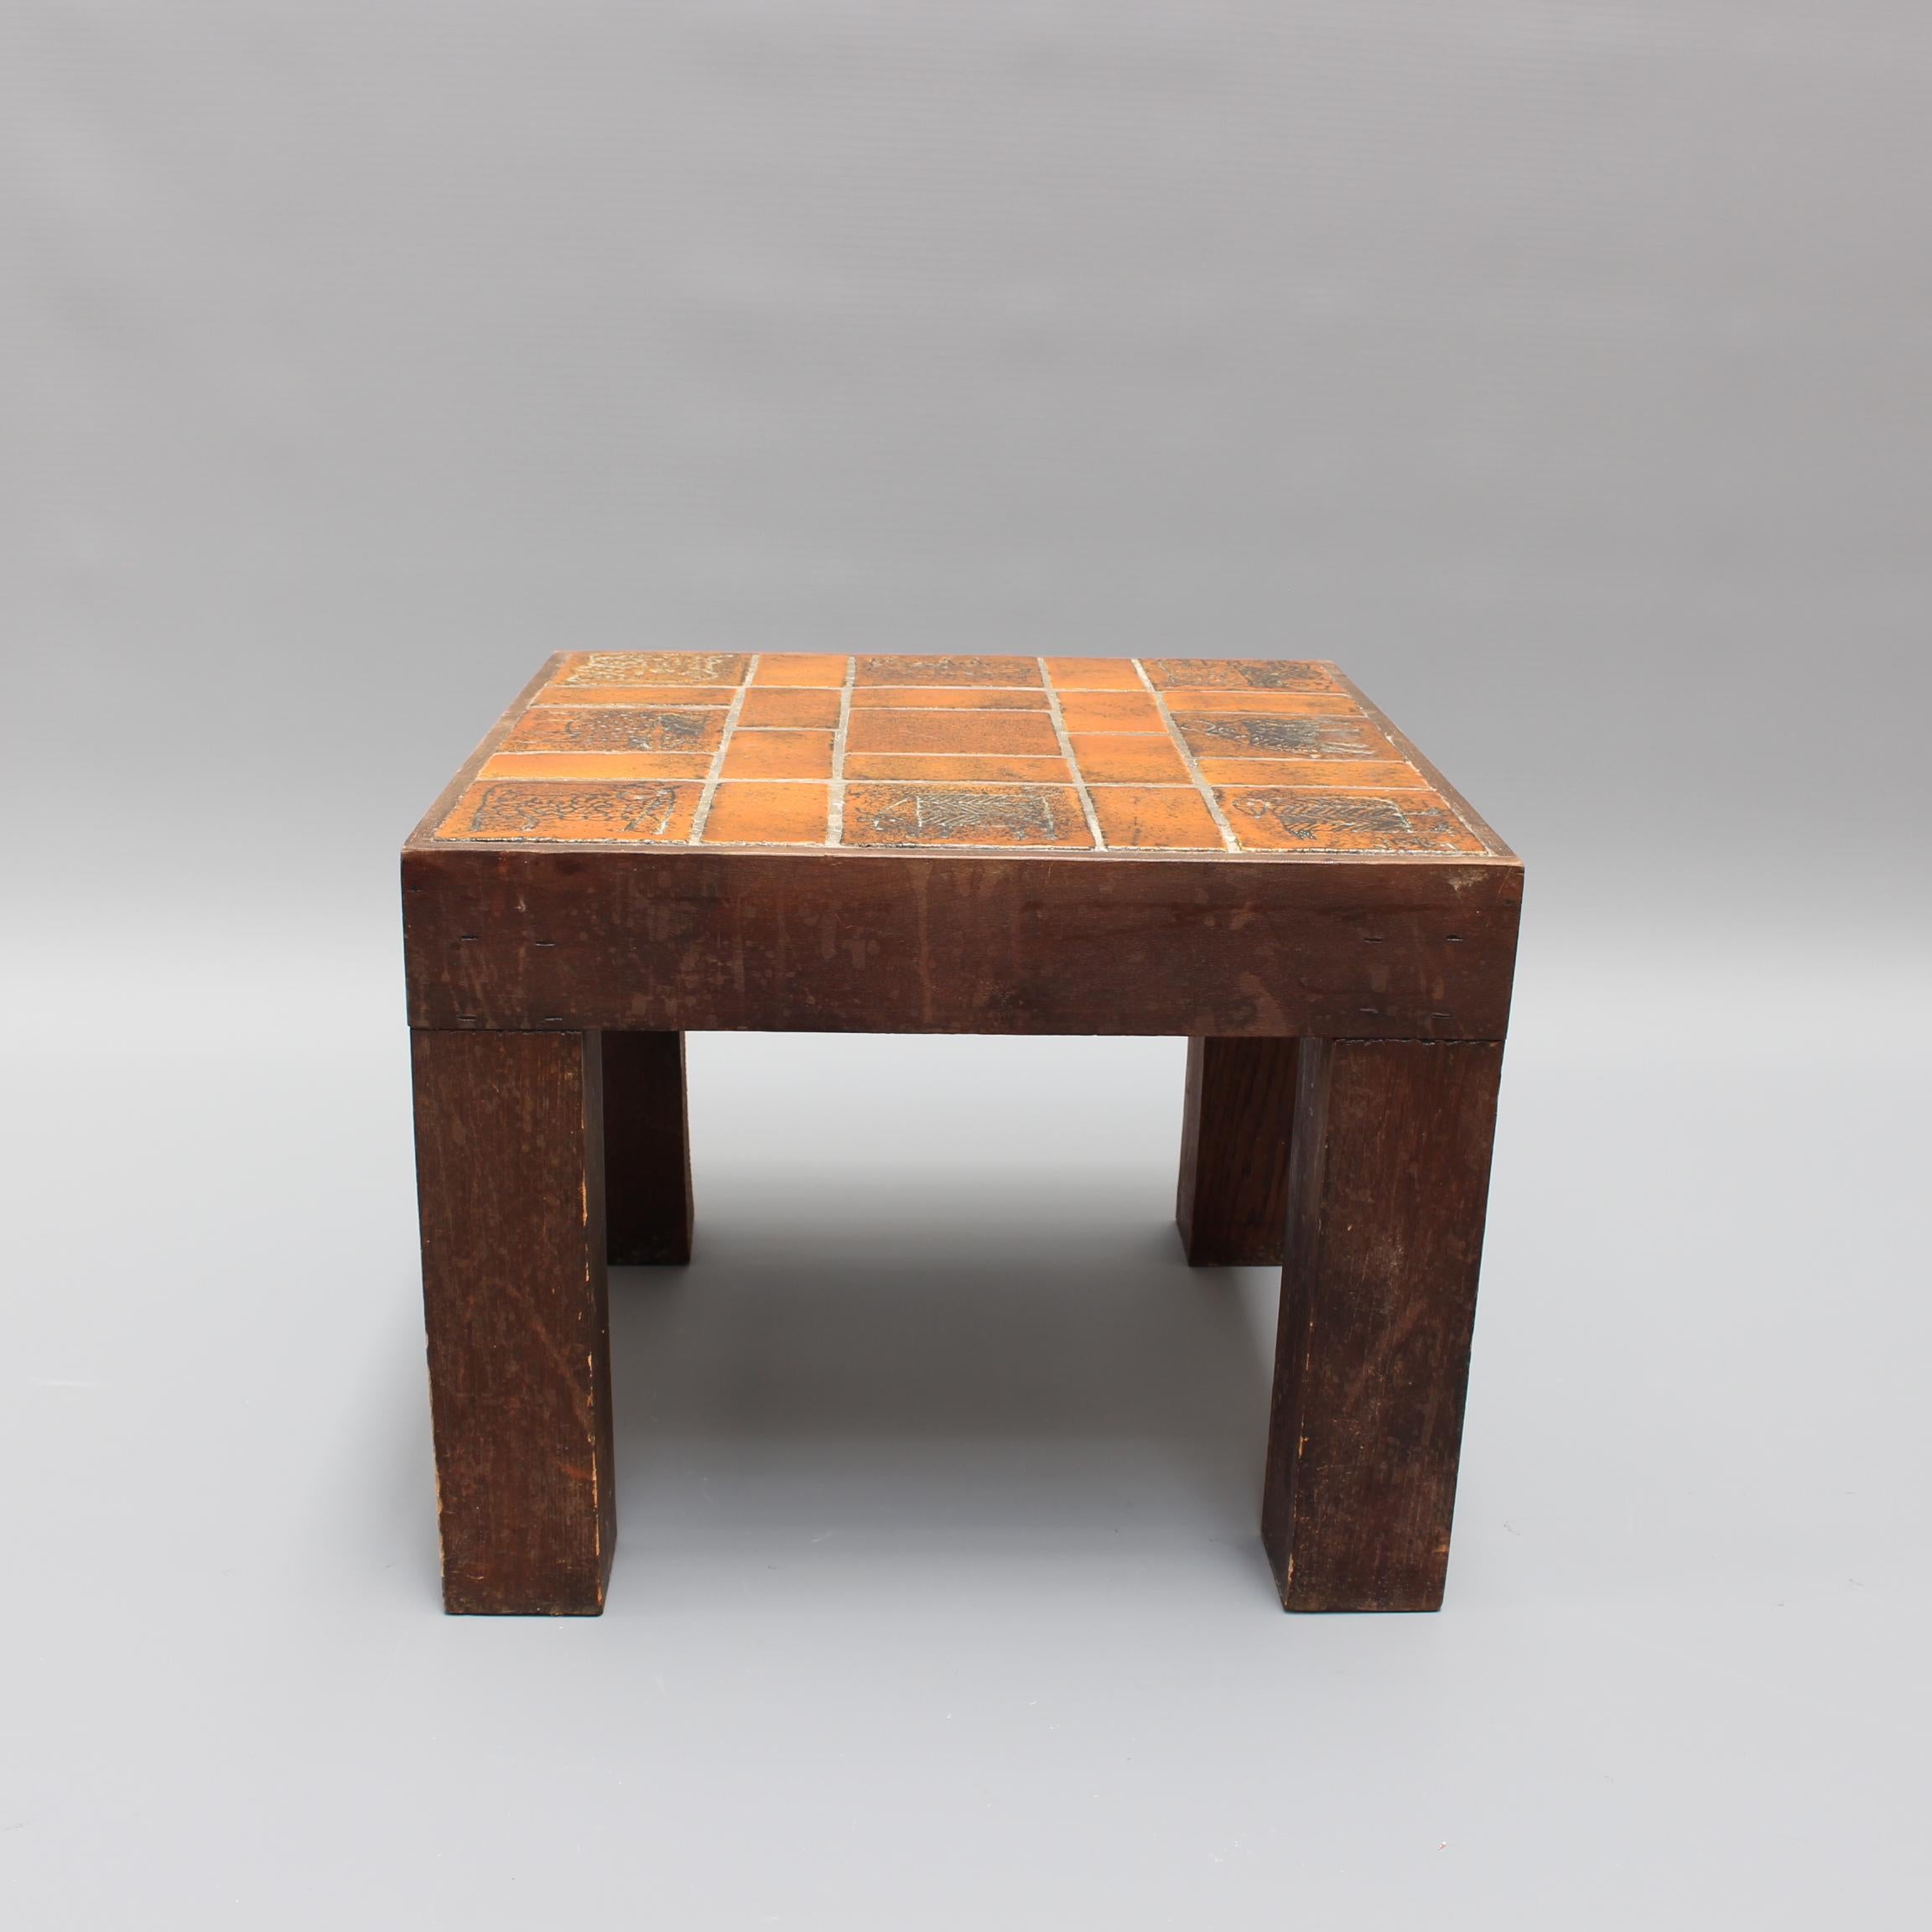 Vintage French Square Side Table with Ceramic Tile Top by Jacques Blin, c. 1950s In Fair Condition For Sale In London, GB